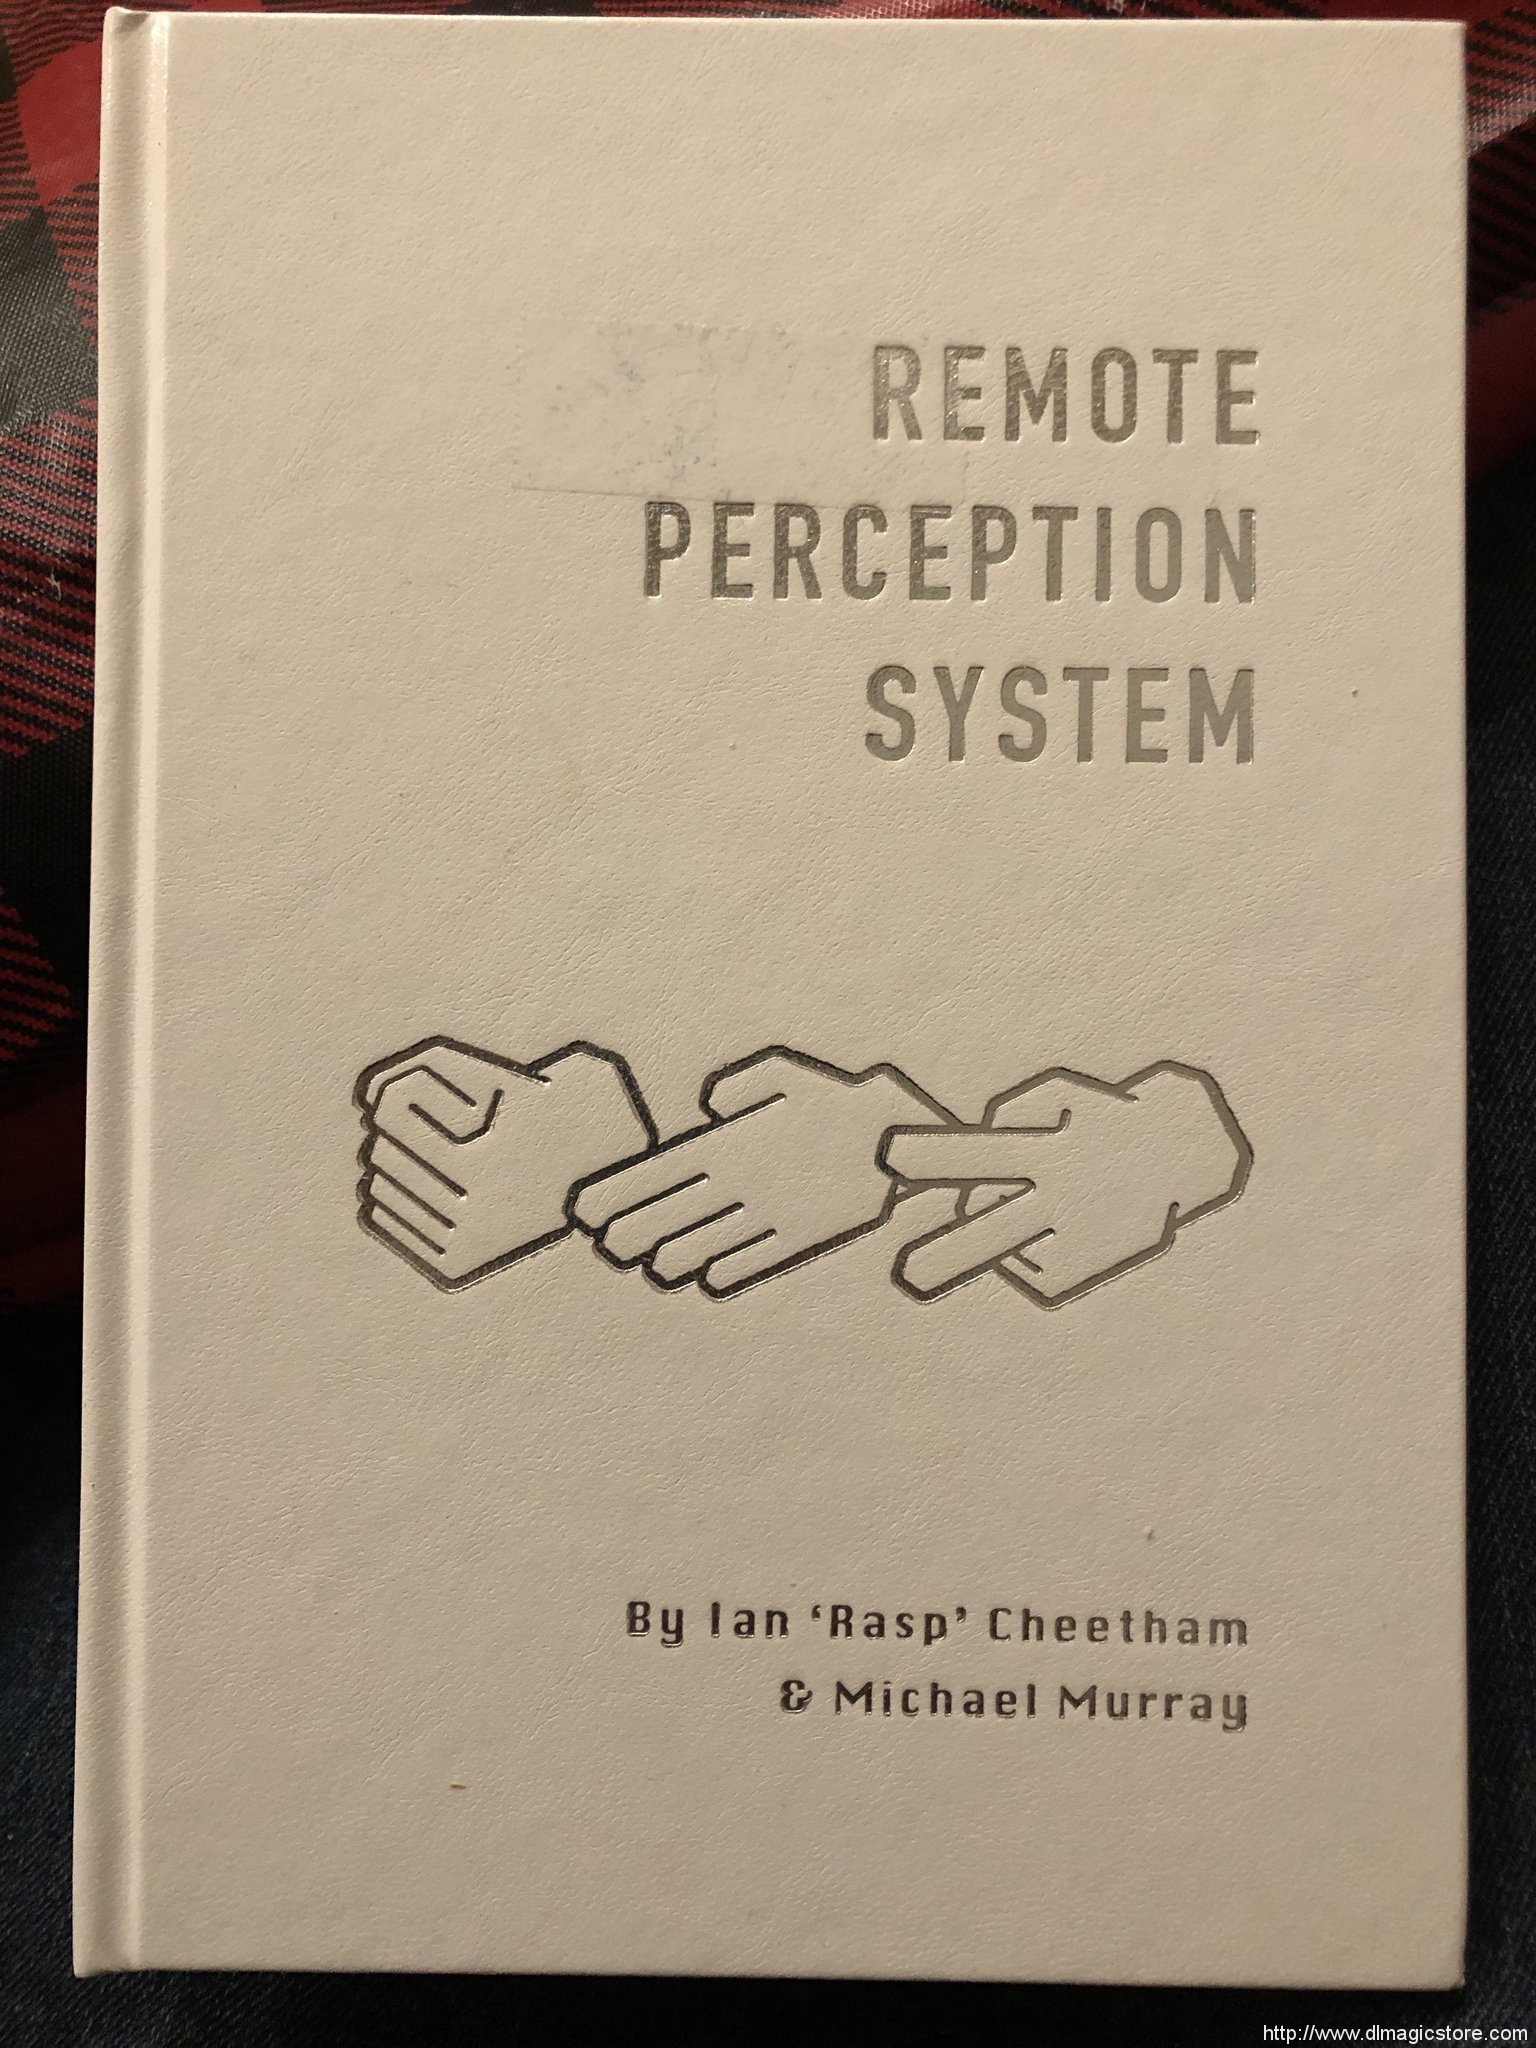 Remote Perception System by Michael Murray